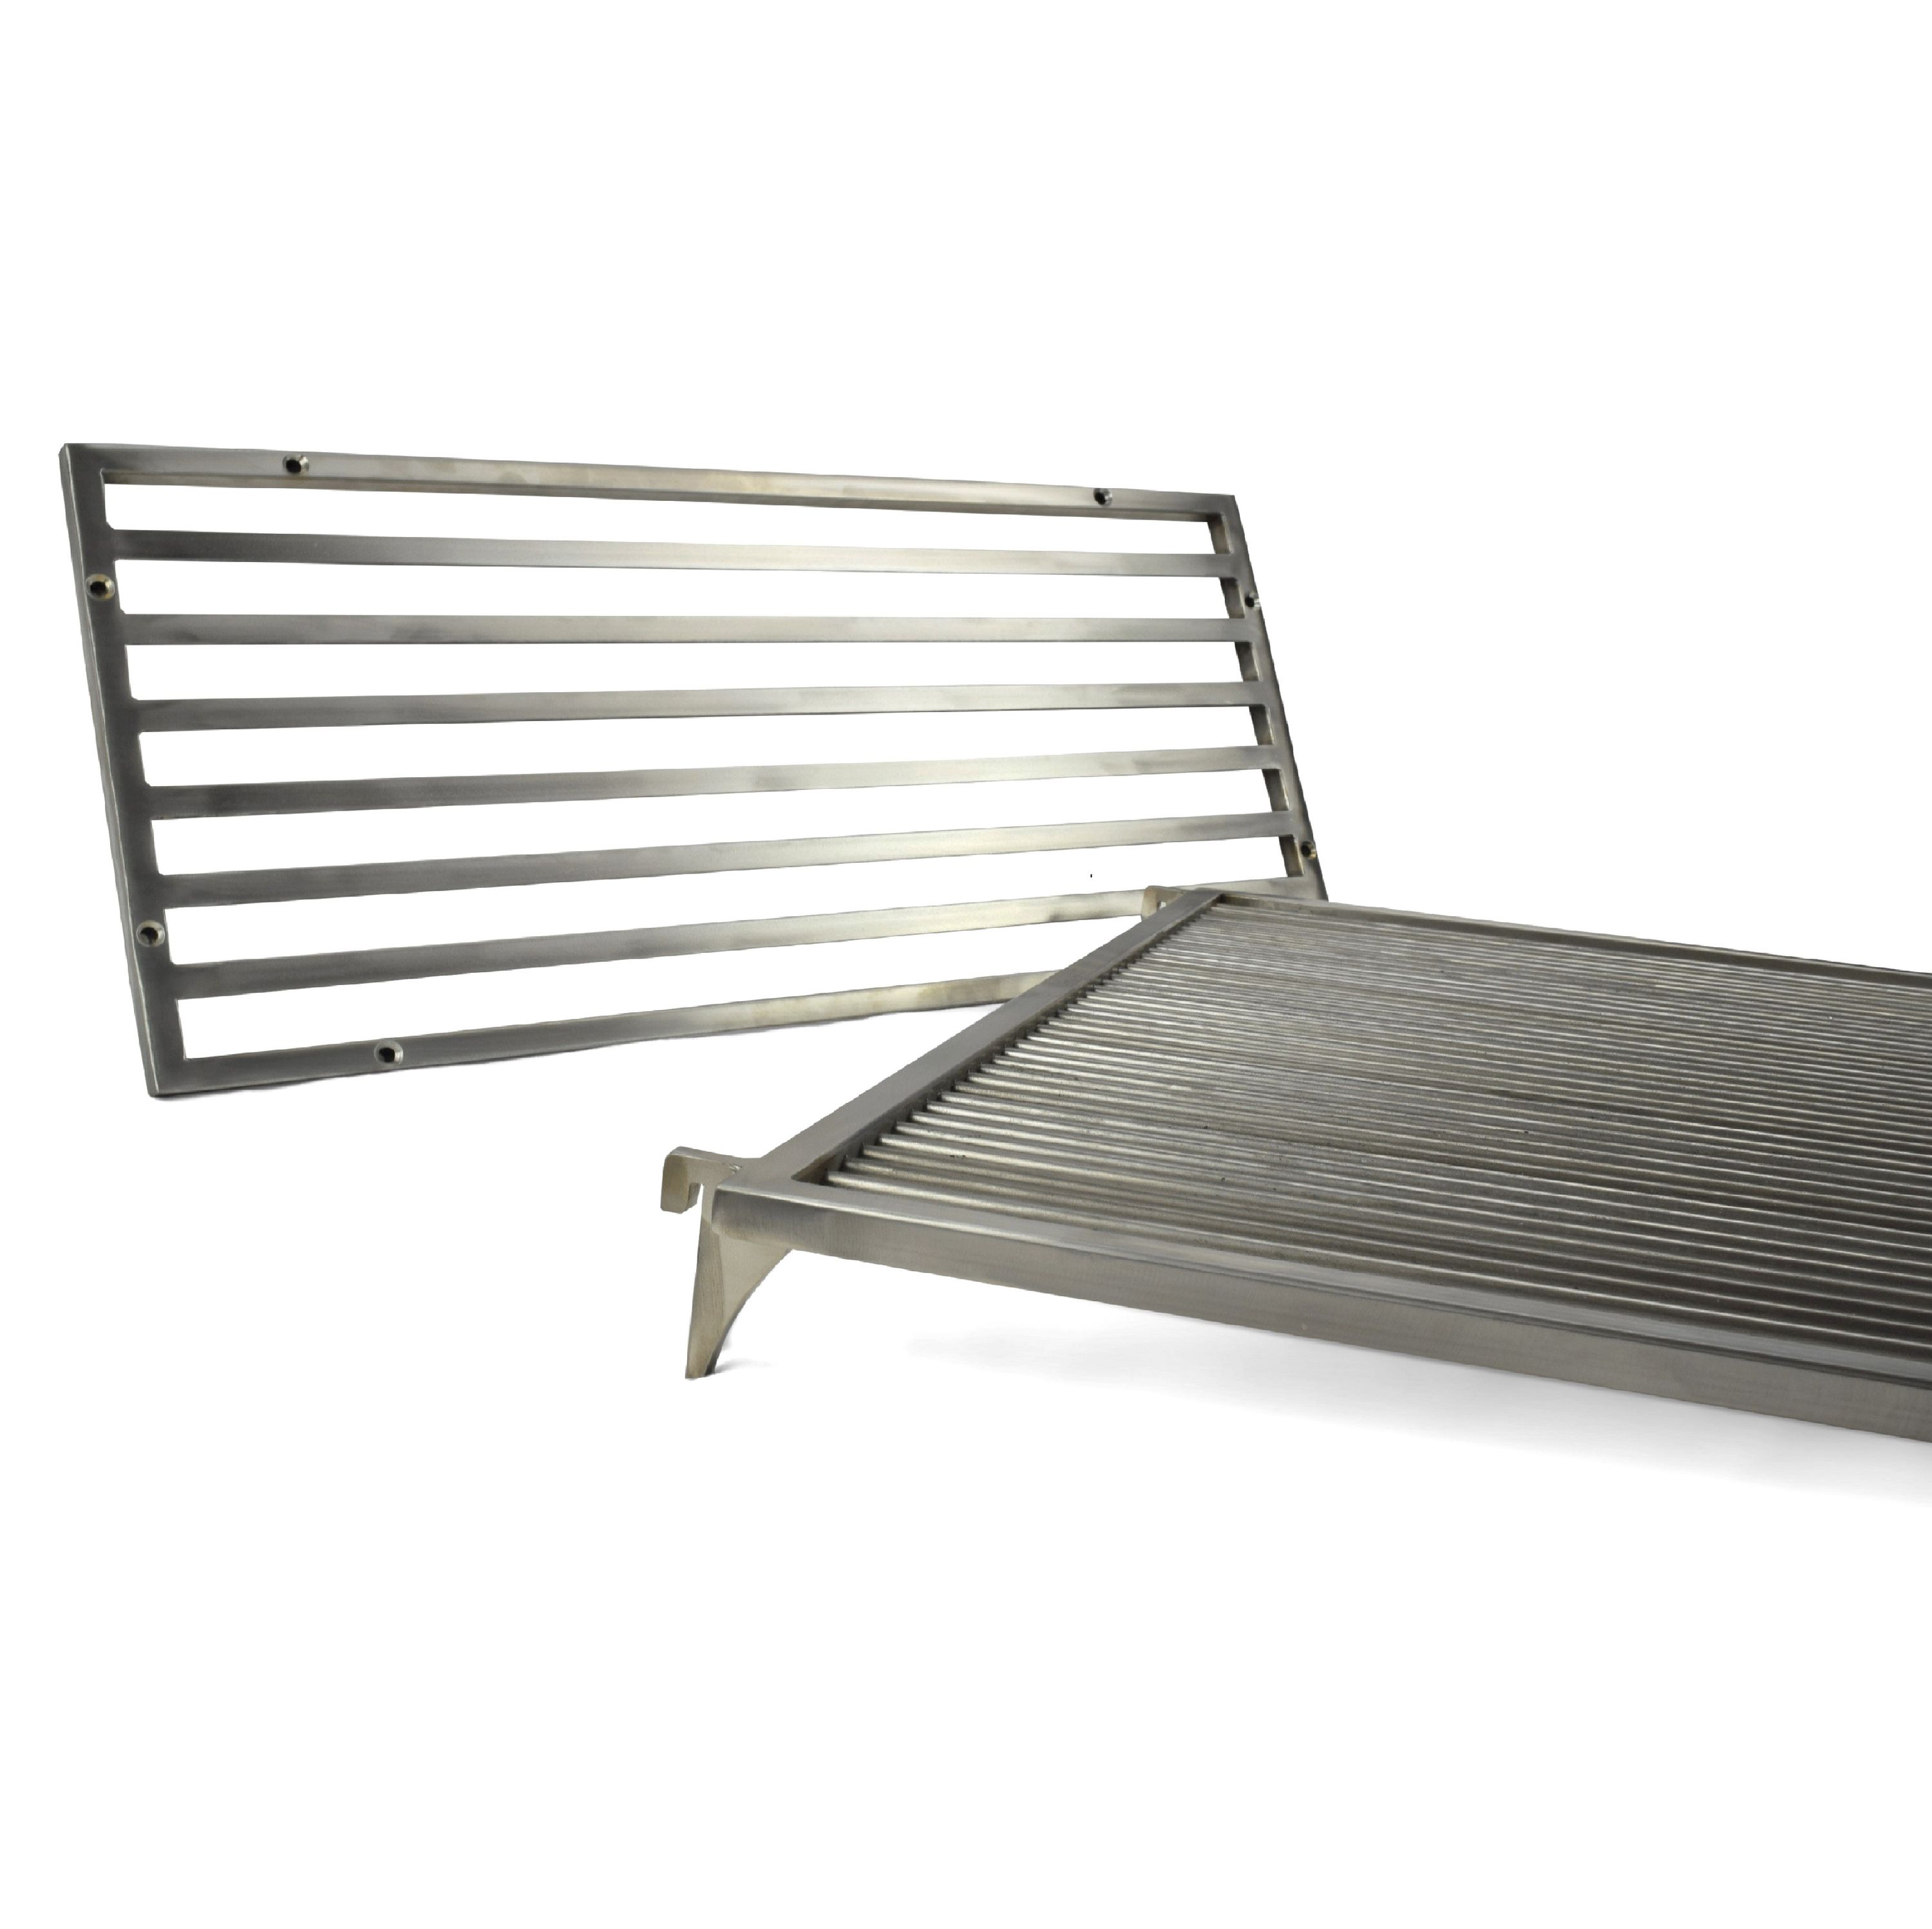 Single latch - grill rack Made to measure from stainless steel